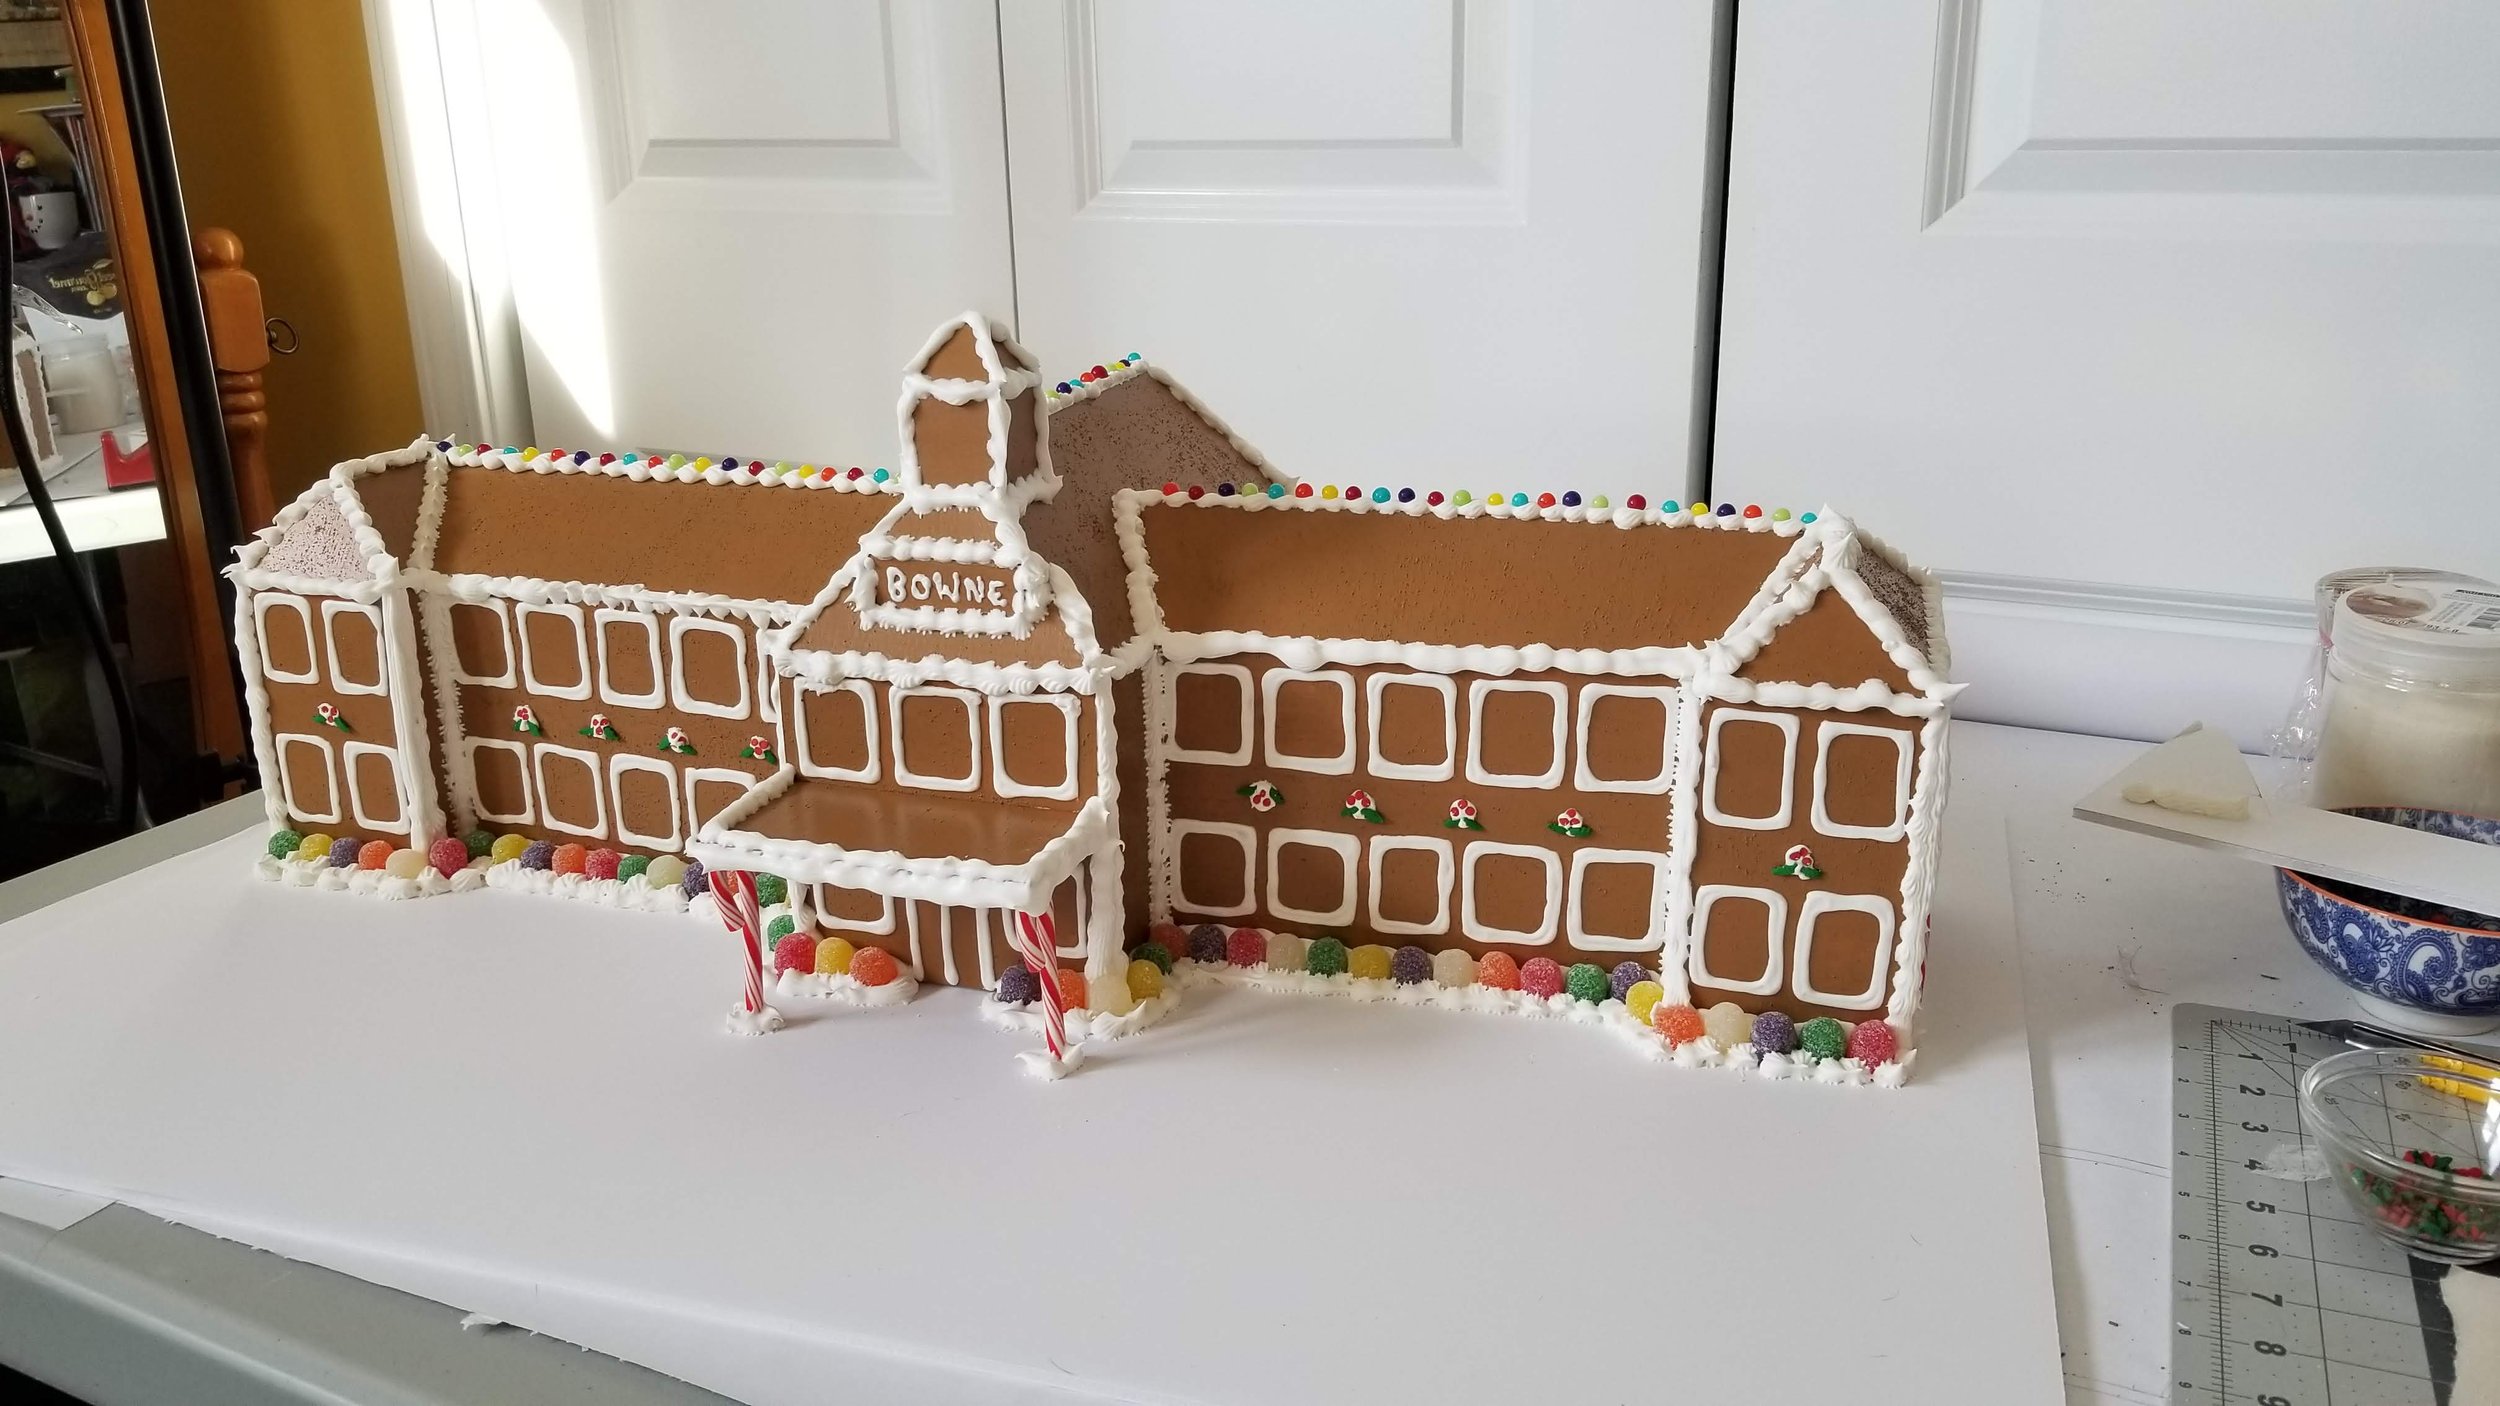 Gingerbread Bowne Hall